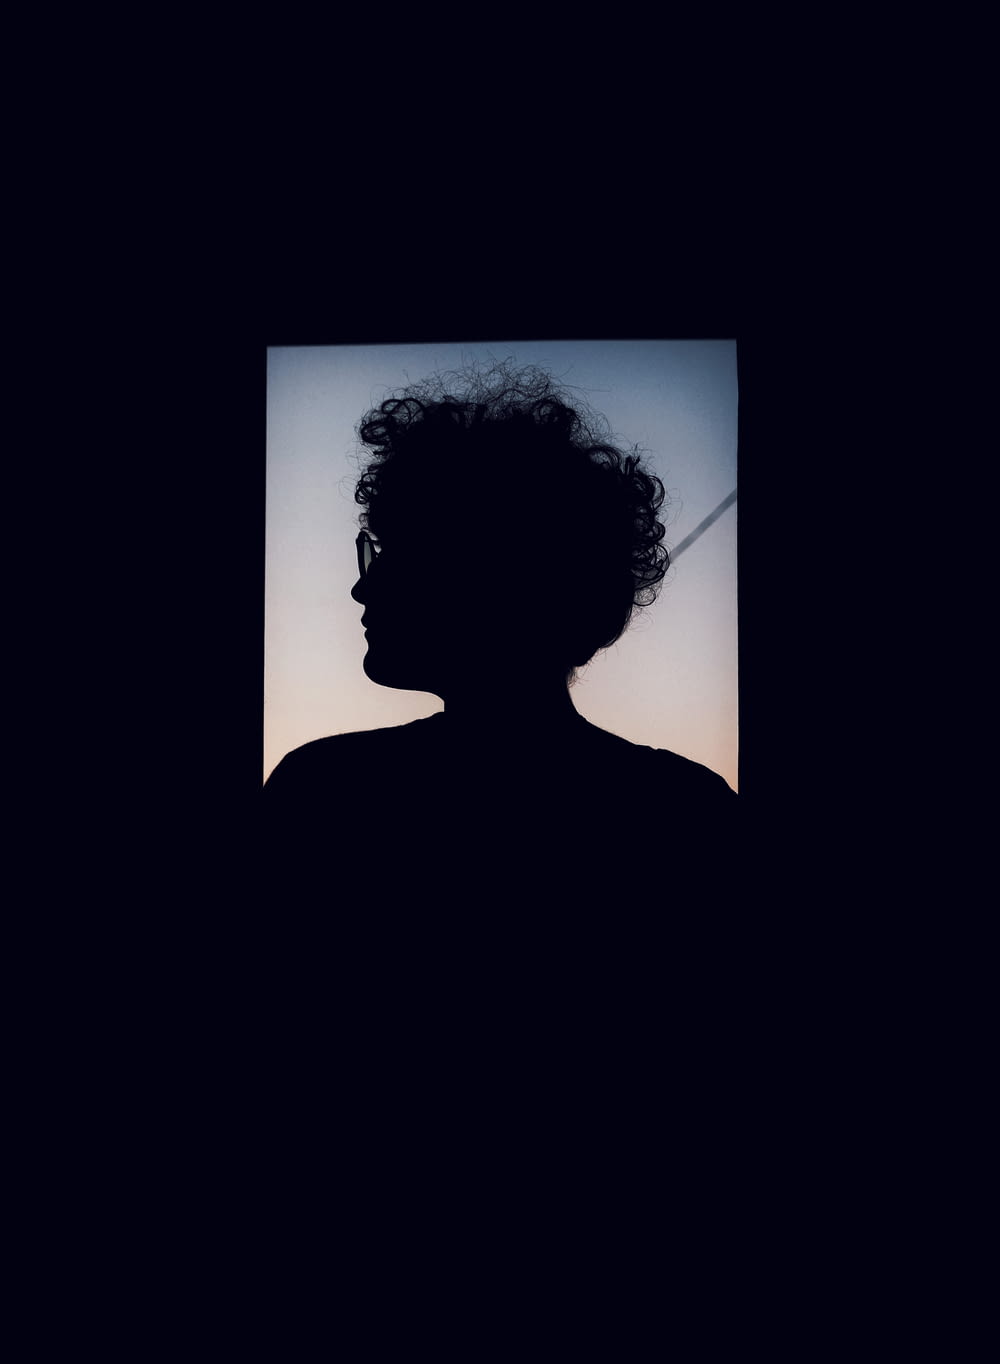 silhouette of person with curly hair and eyeglasses